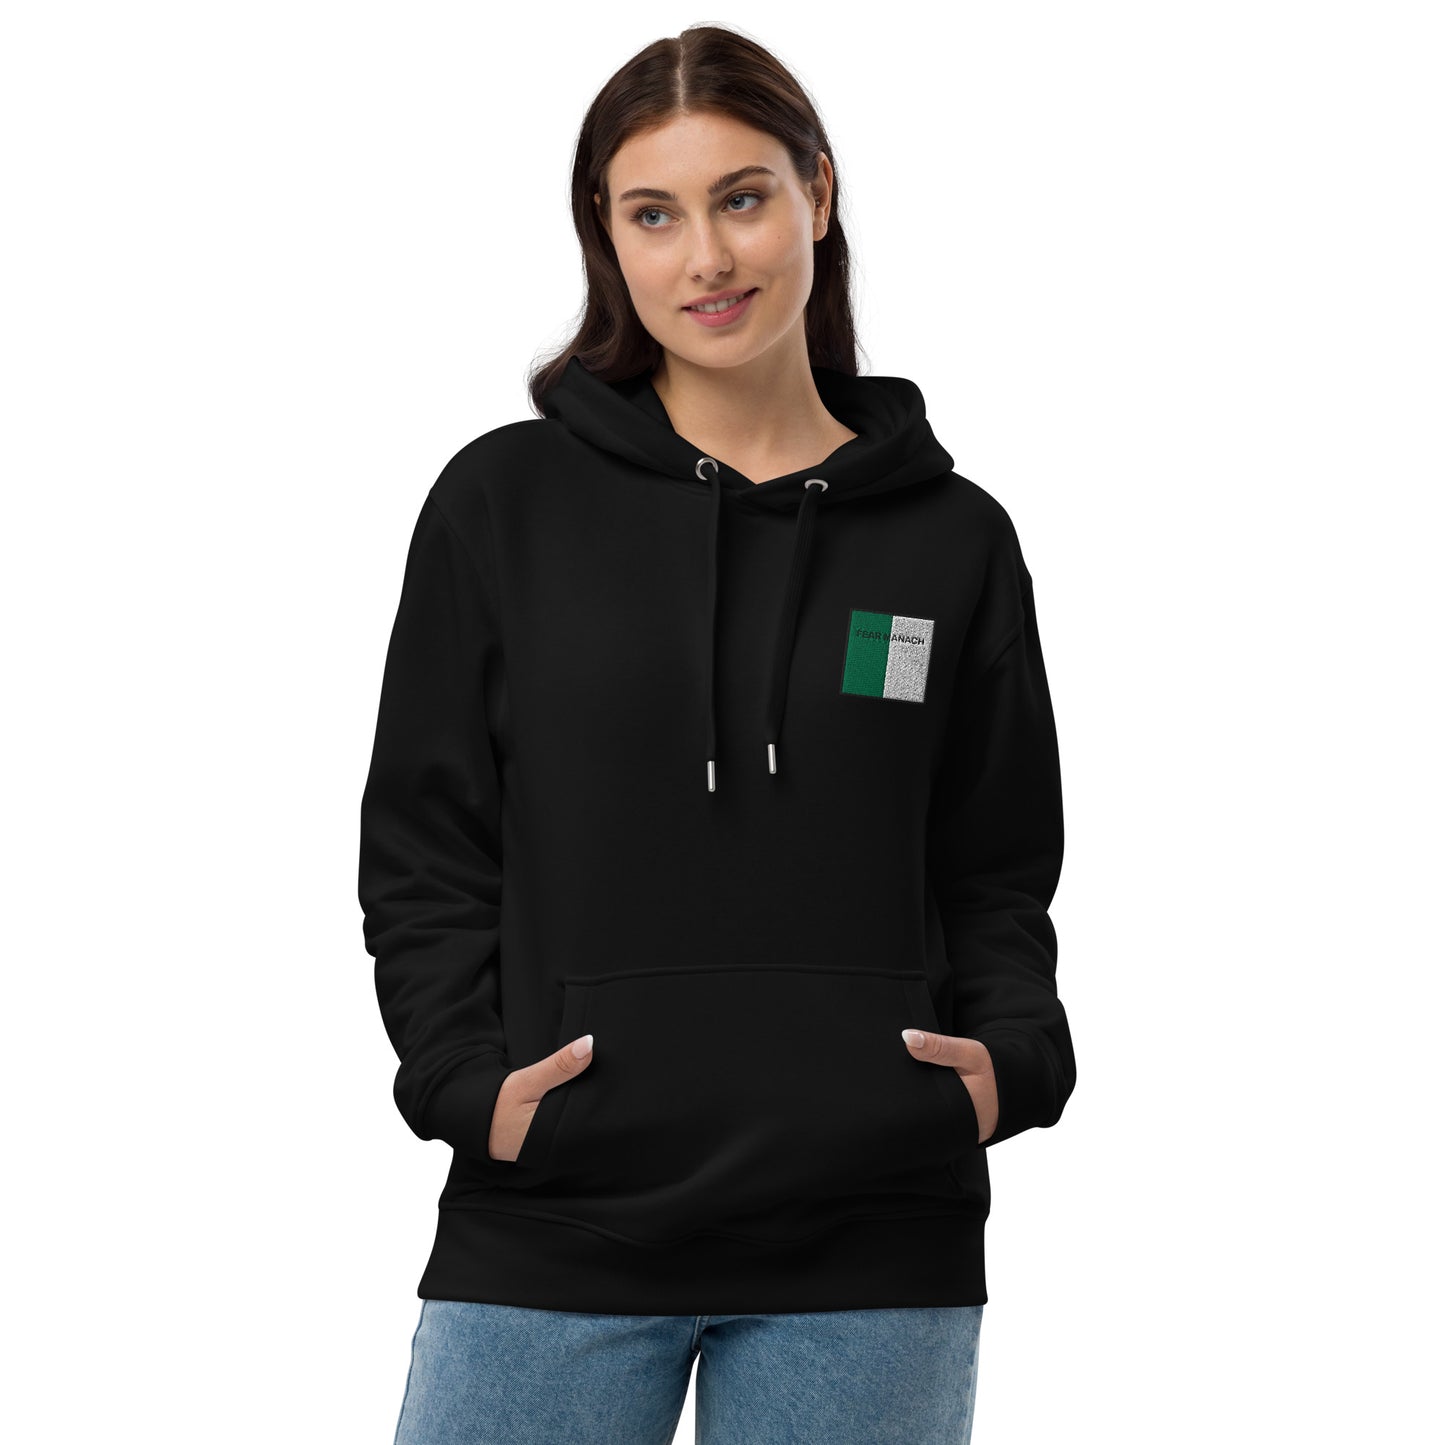 Embroidered Fear Manach Unisex Eco Hoodie